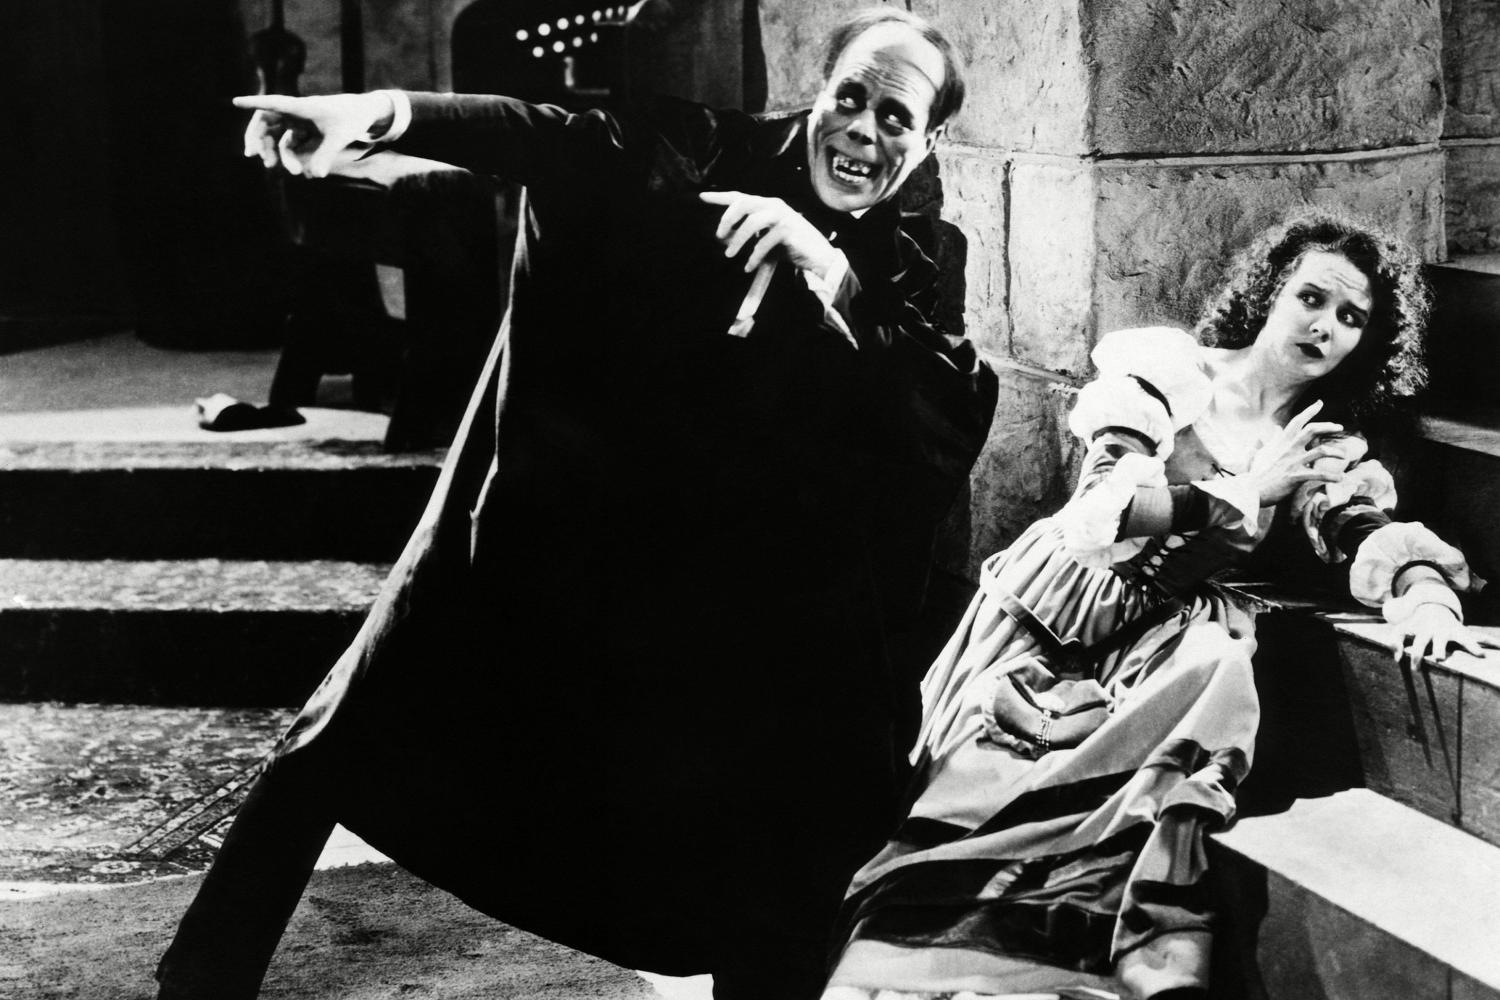 A still from the file Phantom of the Opera featuring a striking scene of the sinister looking man pointing off camera and a shocked woman sitting on steps.